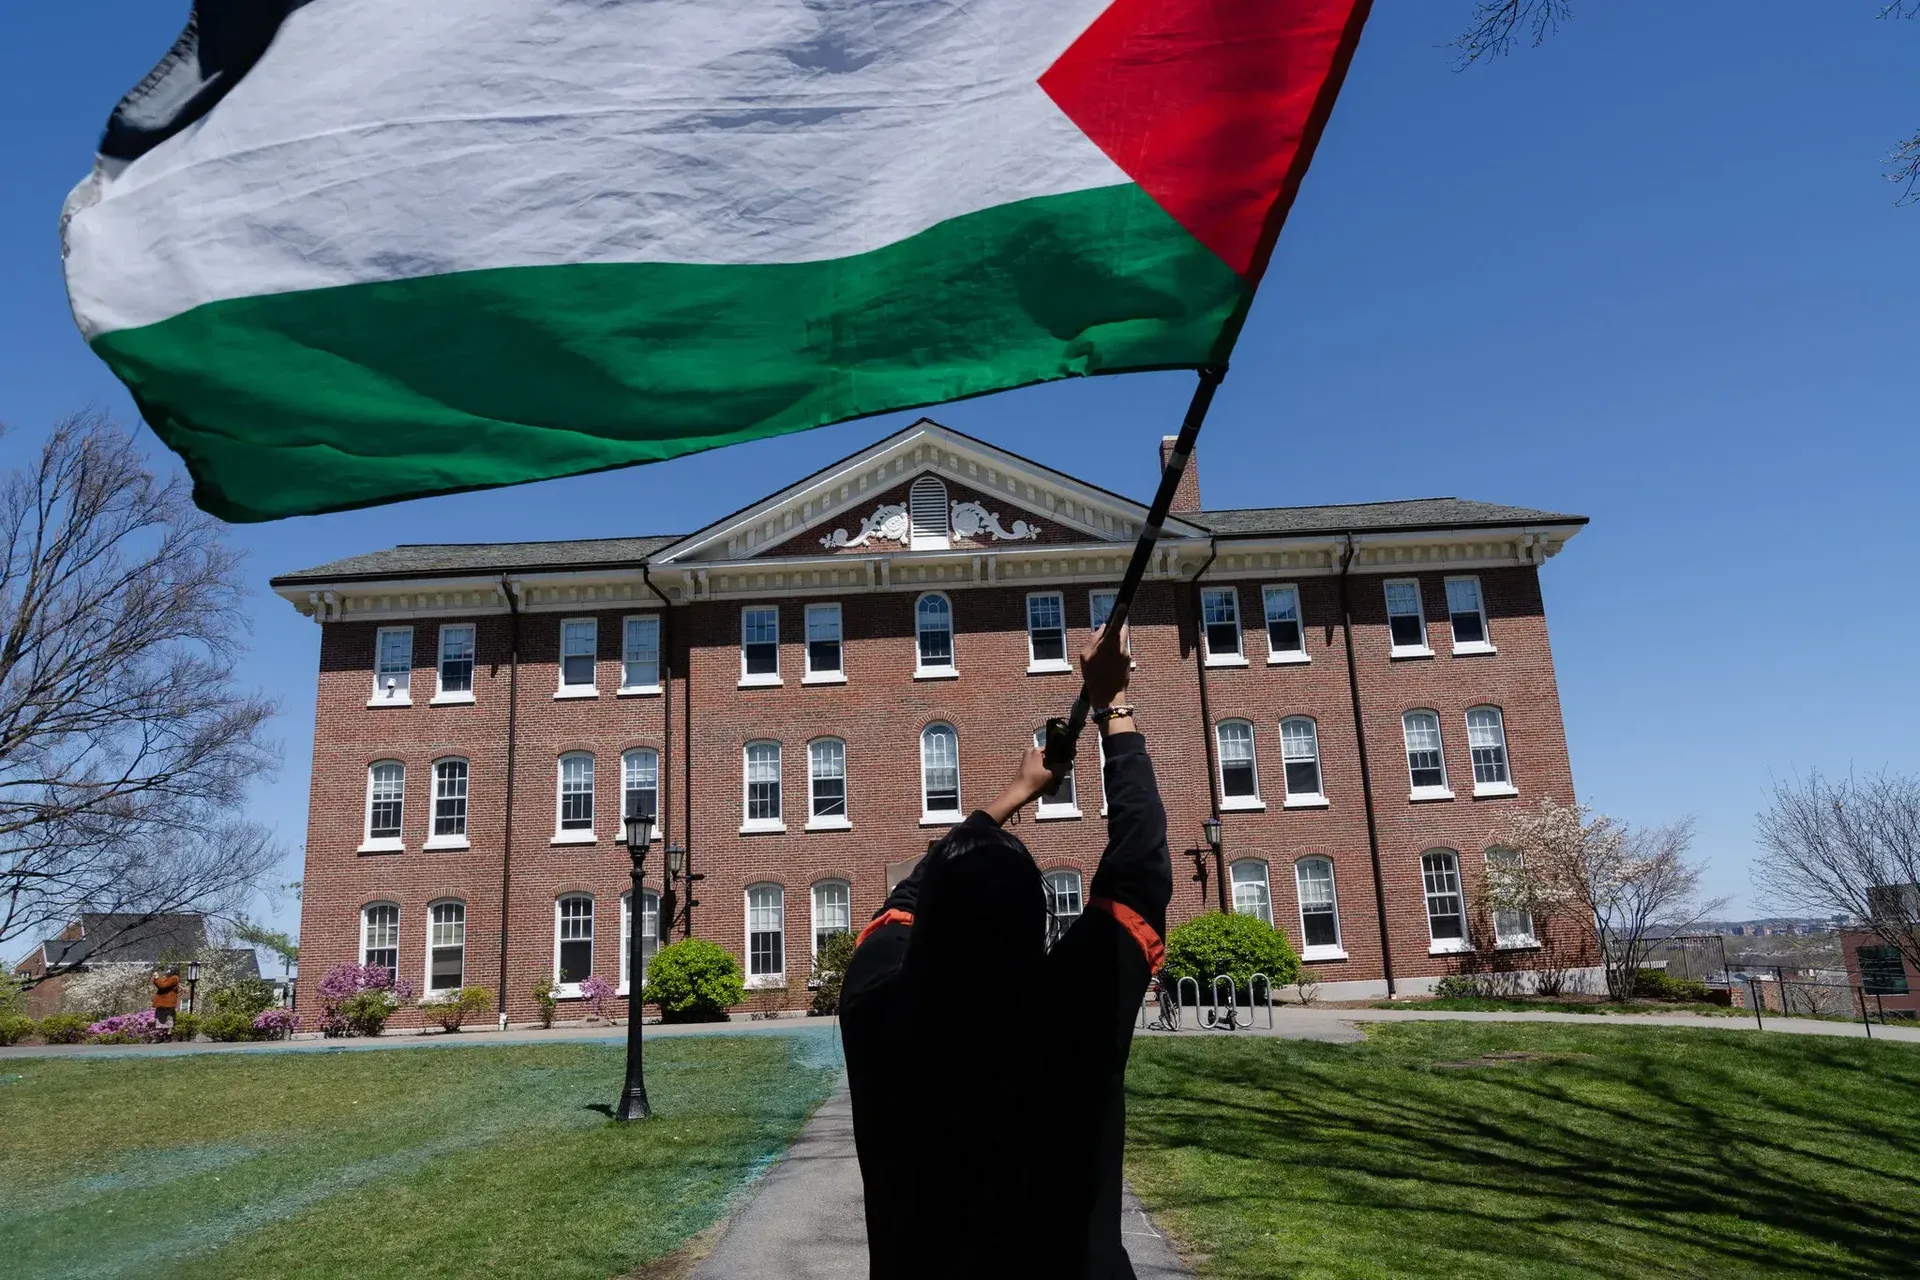 Someone waiving a massive Palestinian flag in front of a building with patches of grass on both sides, likely a university campus.